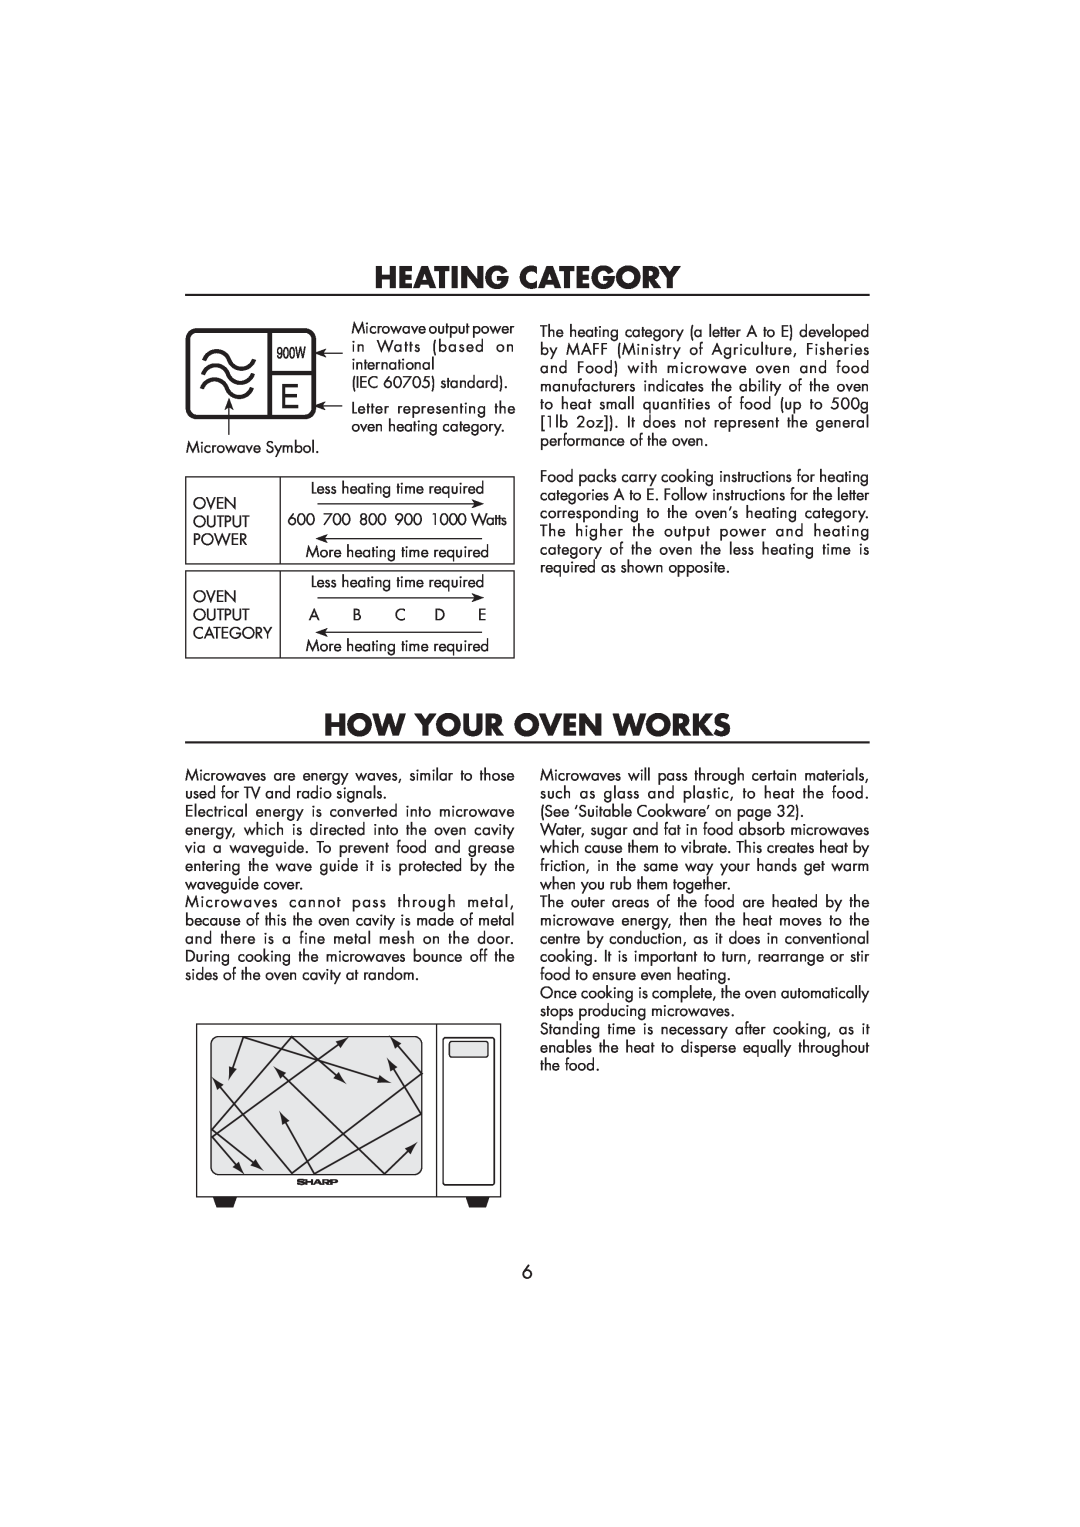 Sharp R-890SLM operation manual Heating Category, How Your Oven Works, Microwave output power 